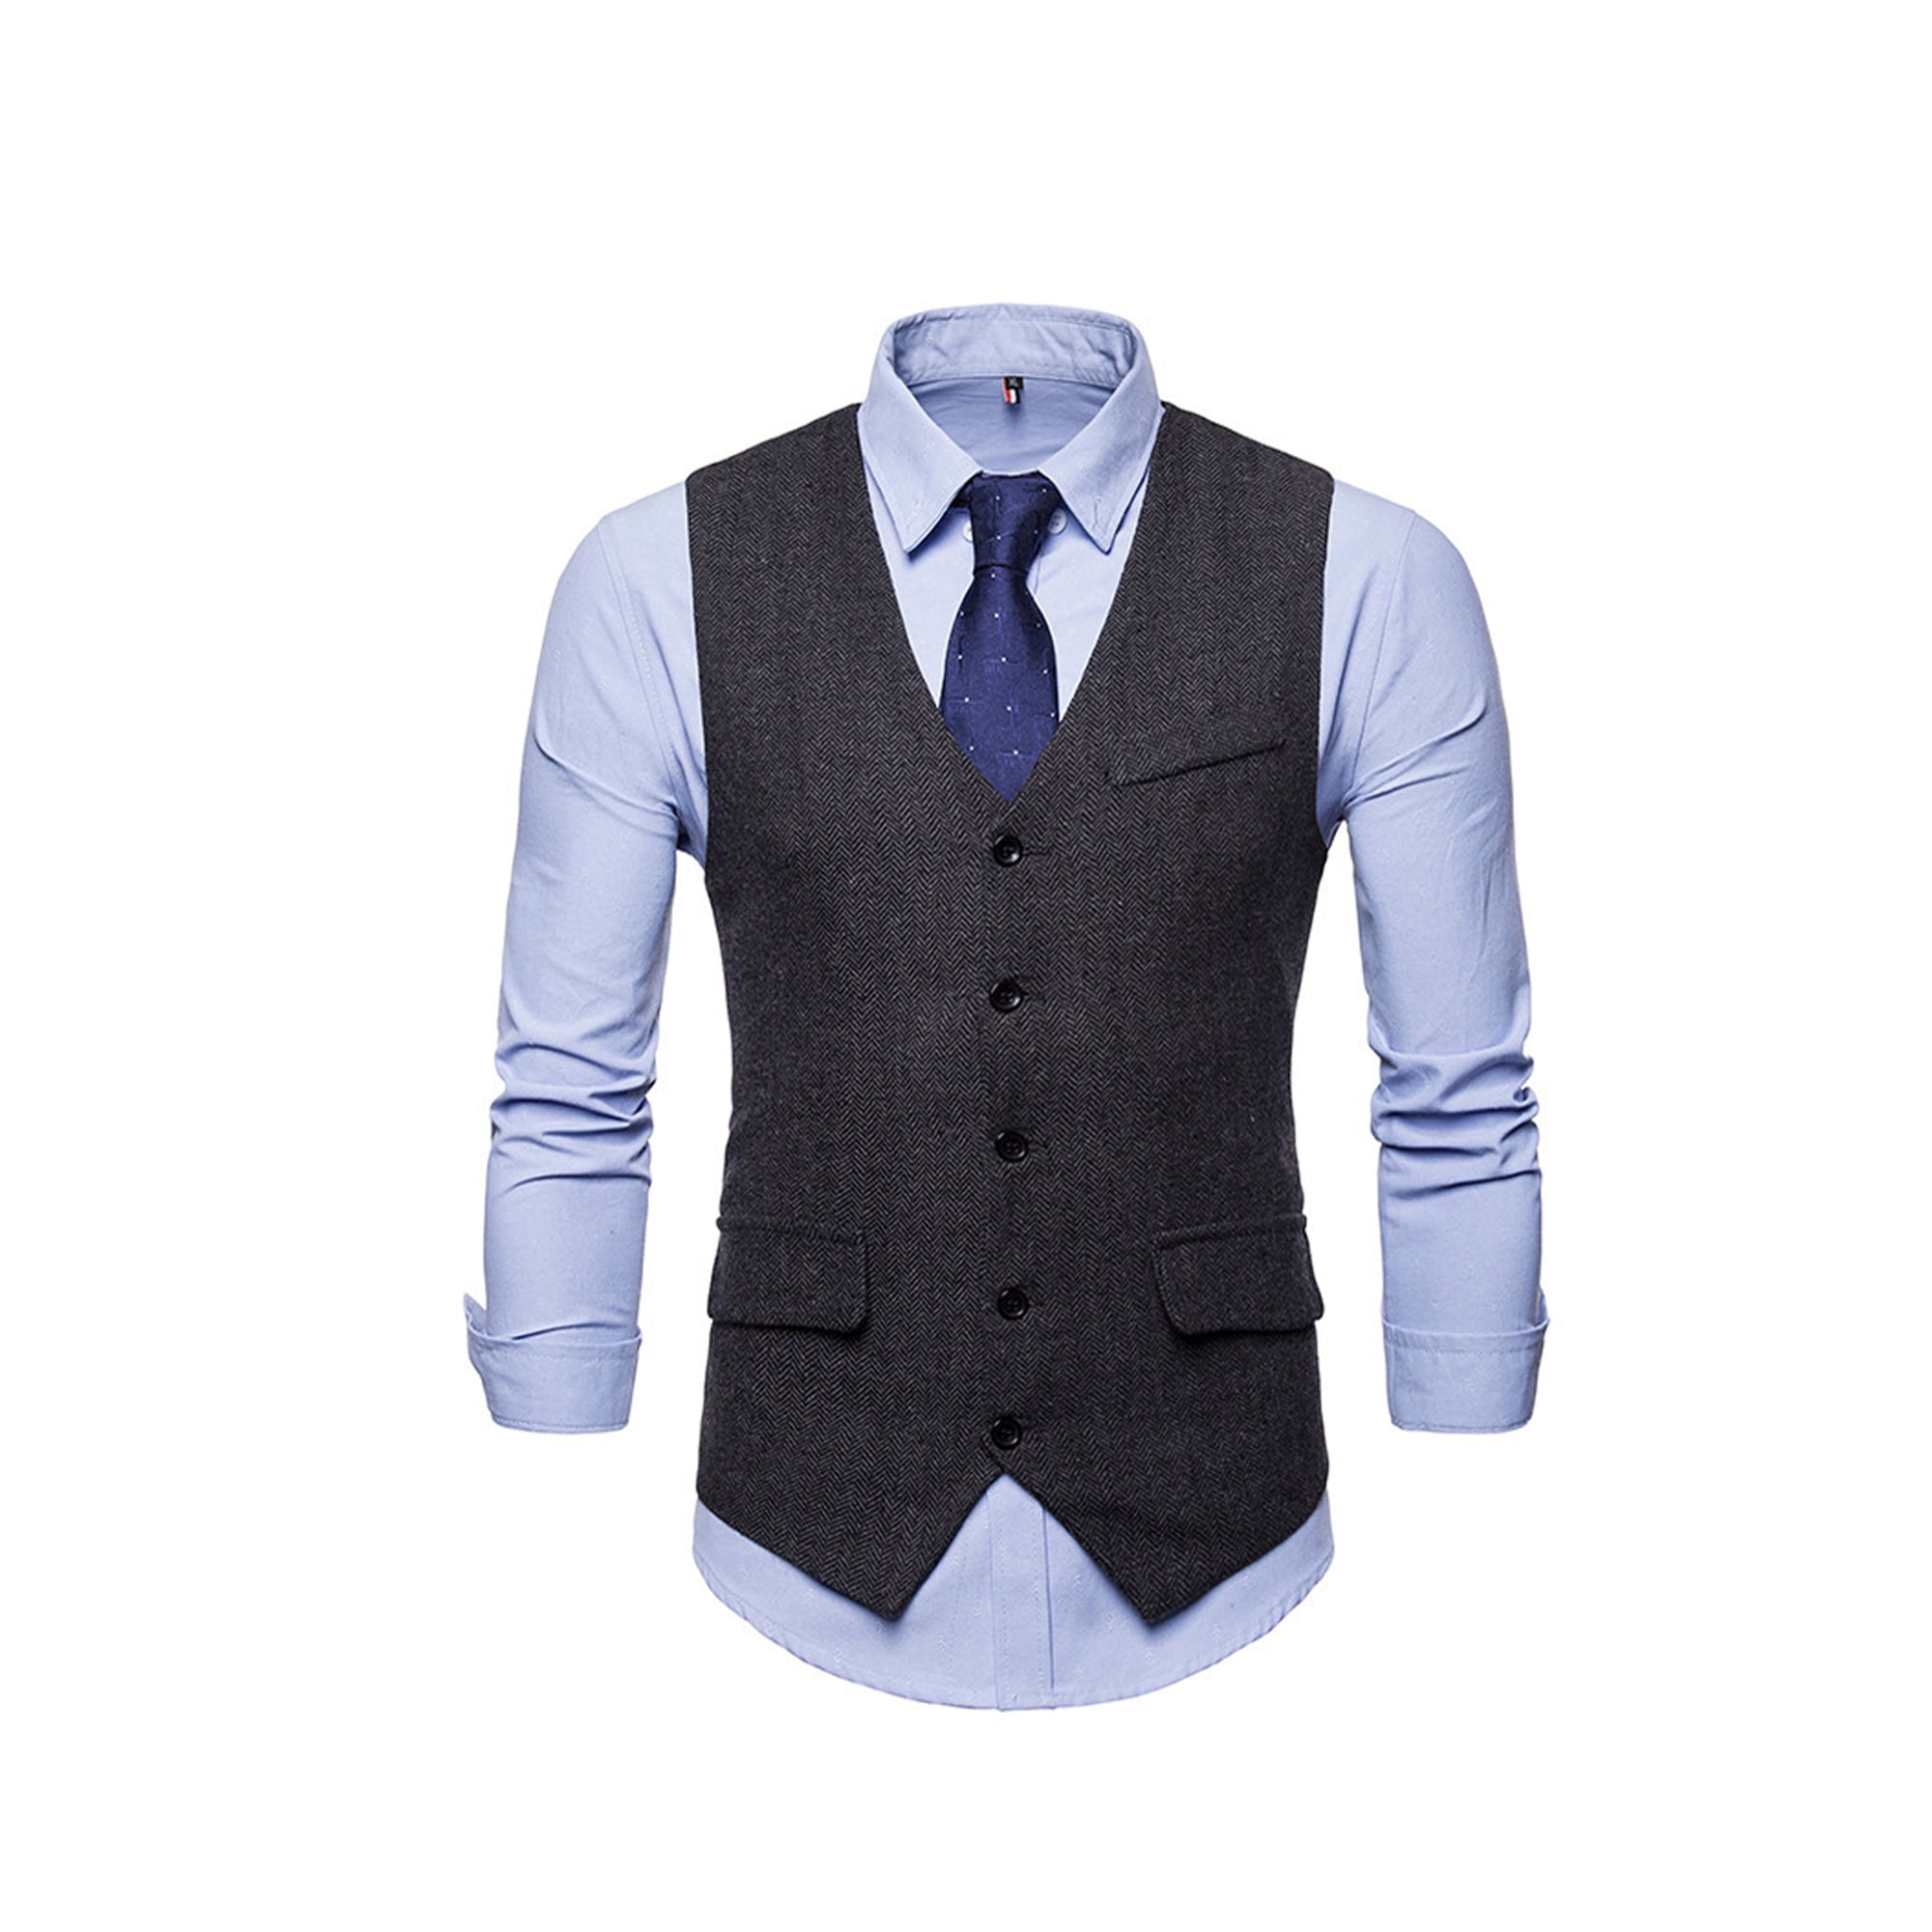 leadership longing town ZAXARRA Men's Waistcoats Formal Solid Color Waistcoat Wedding/Business Suit  Vest With Button | Walmart Canada